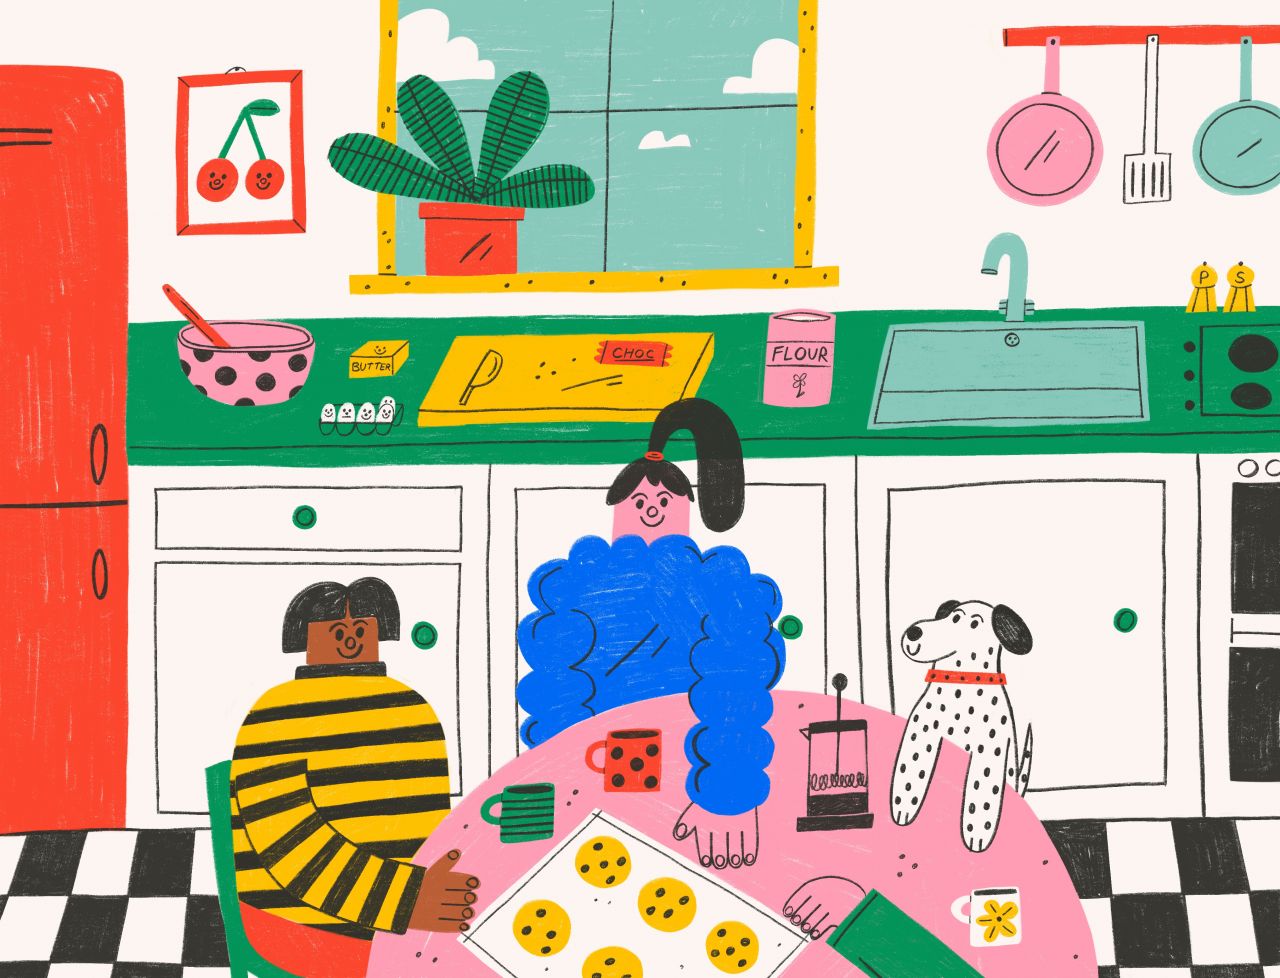 28 emerging illustrators to support and follow for inspiration in 2021 |  Creative Boom